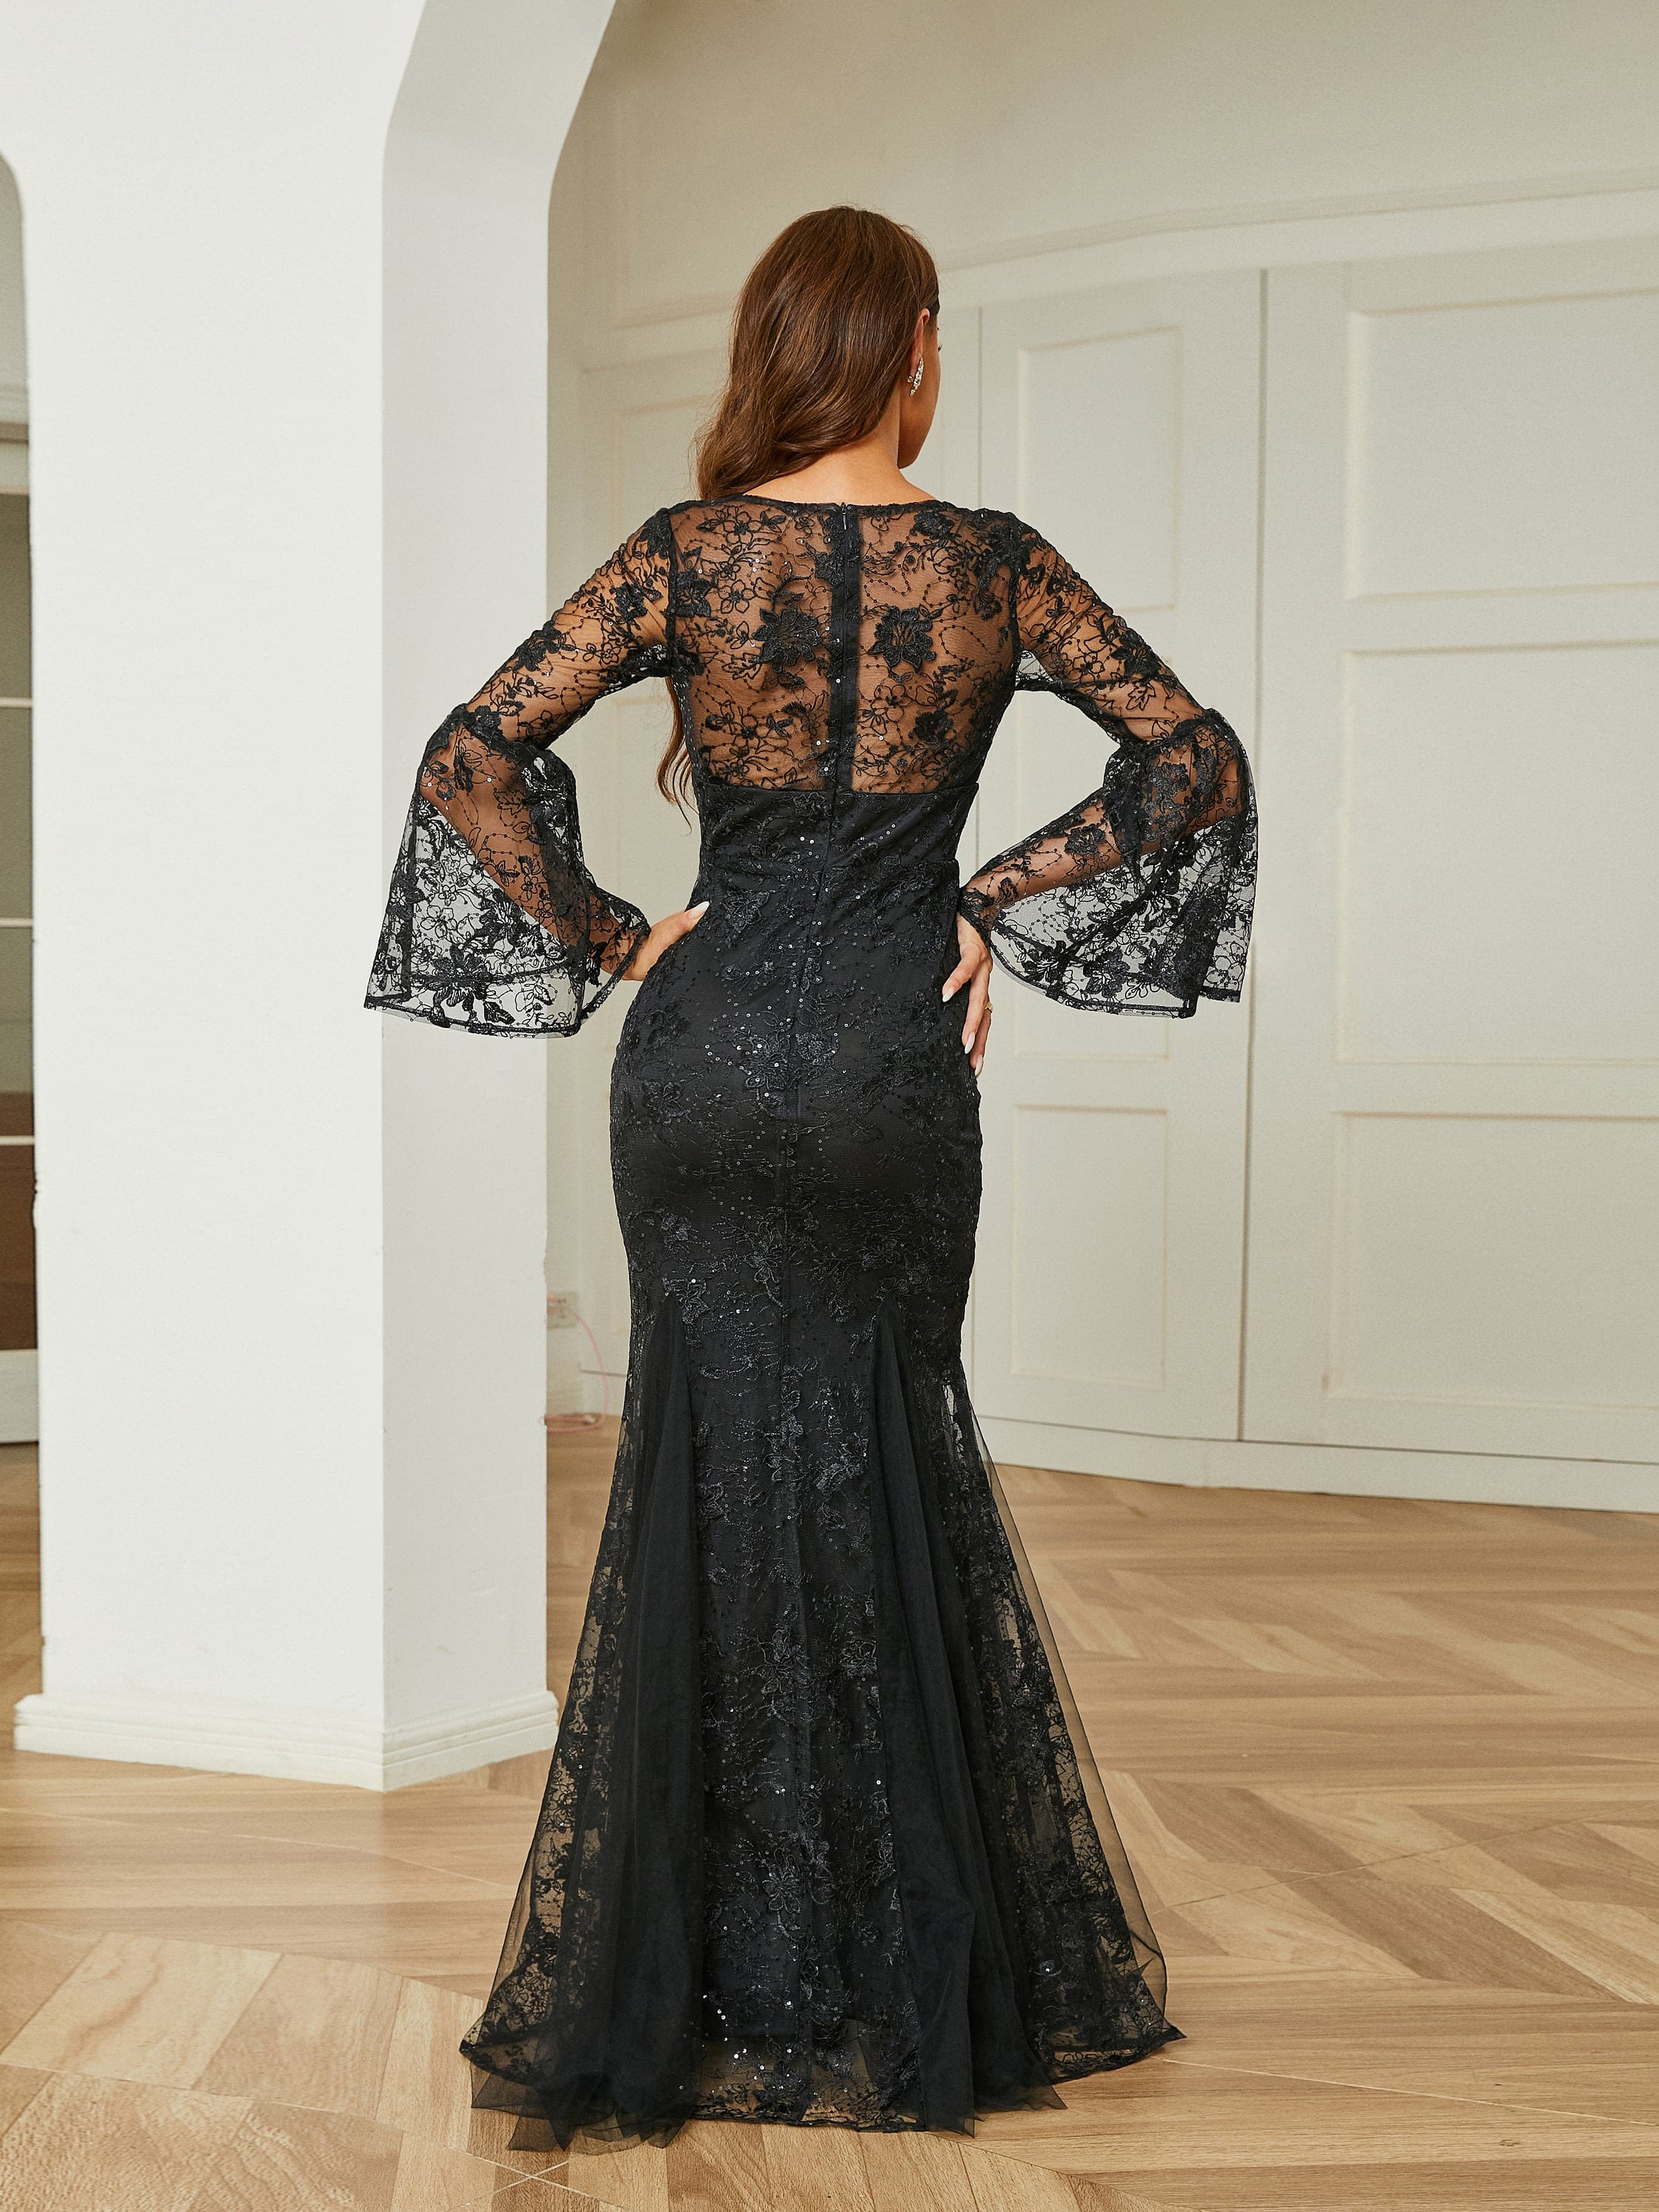 Lace Embroidered Black Formal Evening Dress RH30552 MISS ORD